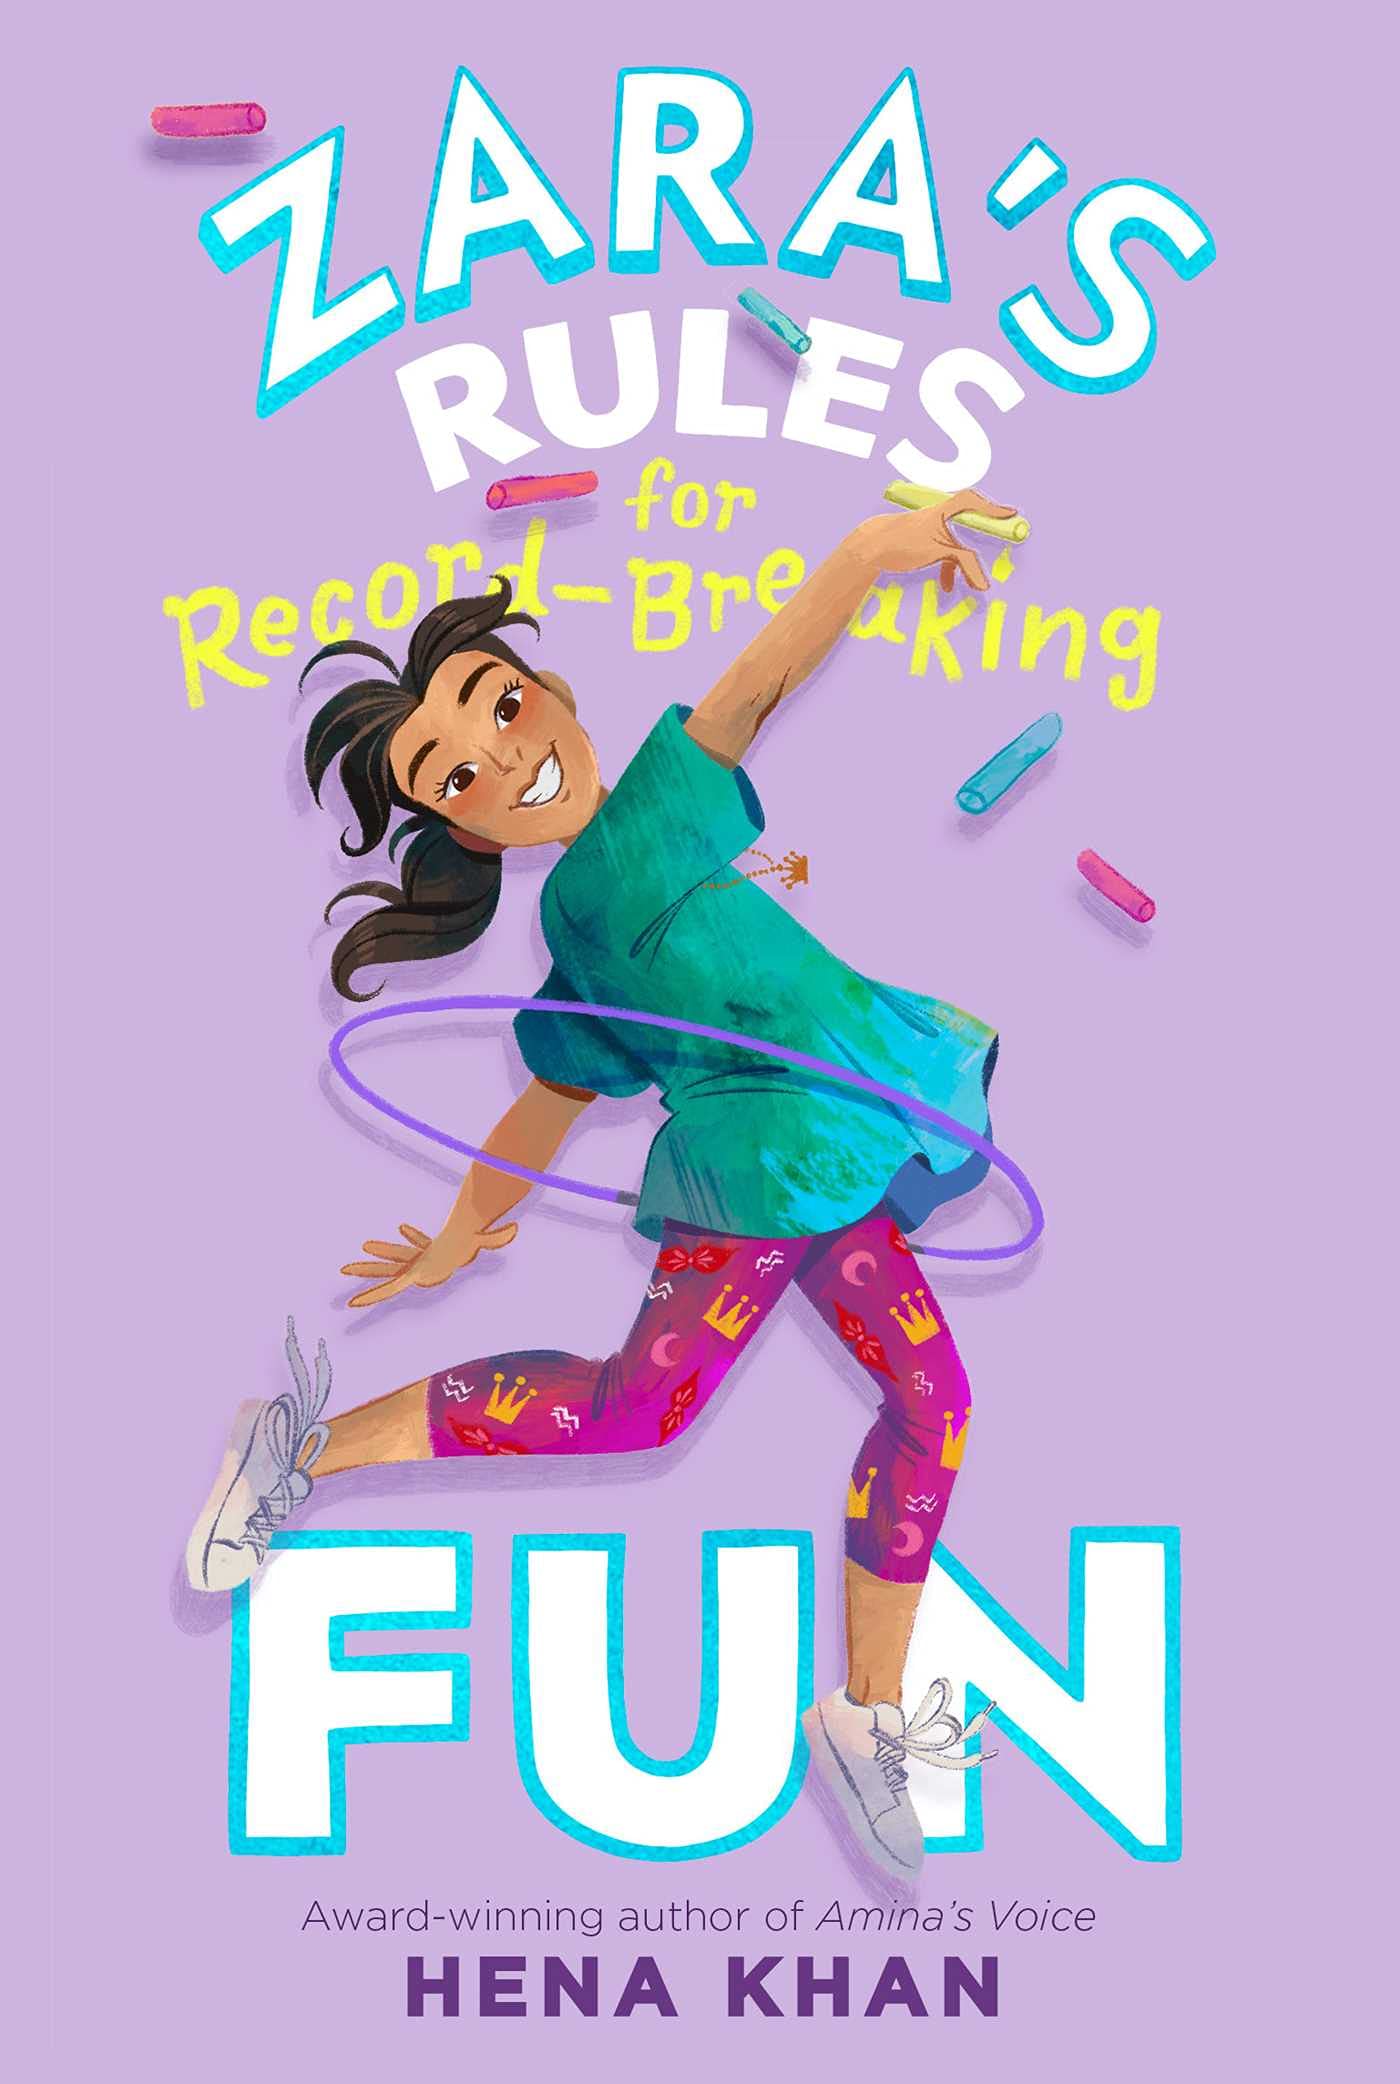 Title of book #1 with cartoon of main character spinning around